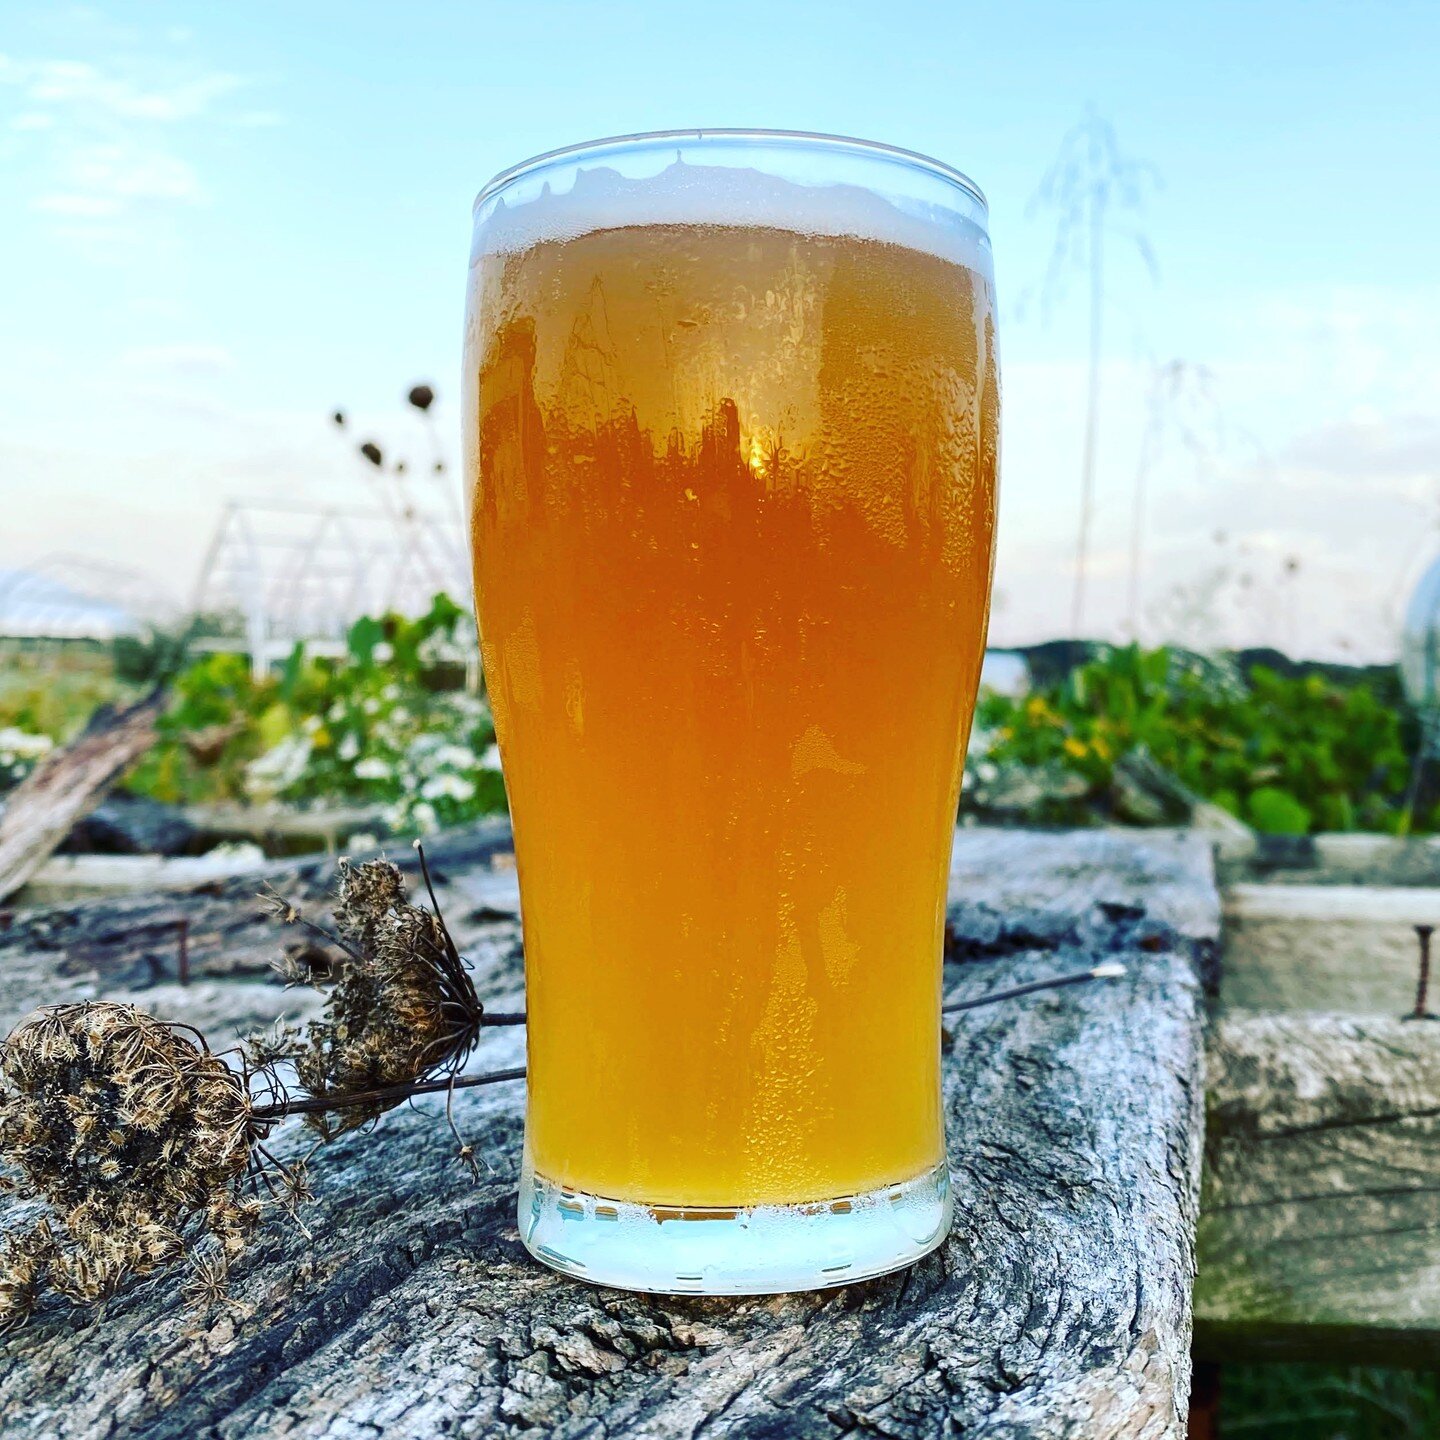 We have a new beer on tap that takes things in a new direction. The &quot;Sun Break Ale&quot; is fermented entirely with Brettanomyces yeast, giving it refreshingly funky aromas and flavors of dried fruit and sour cherry. A high carbonation, tart fin